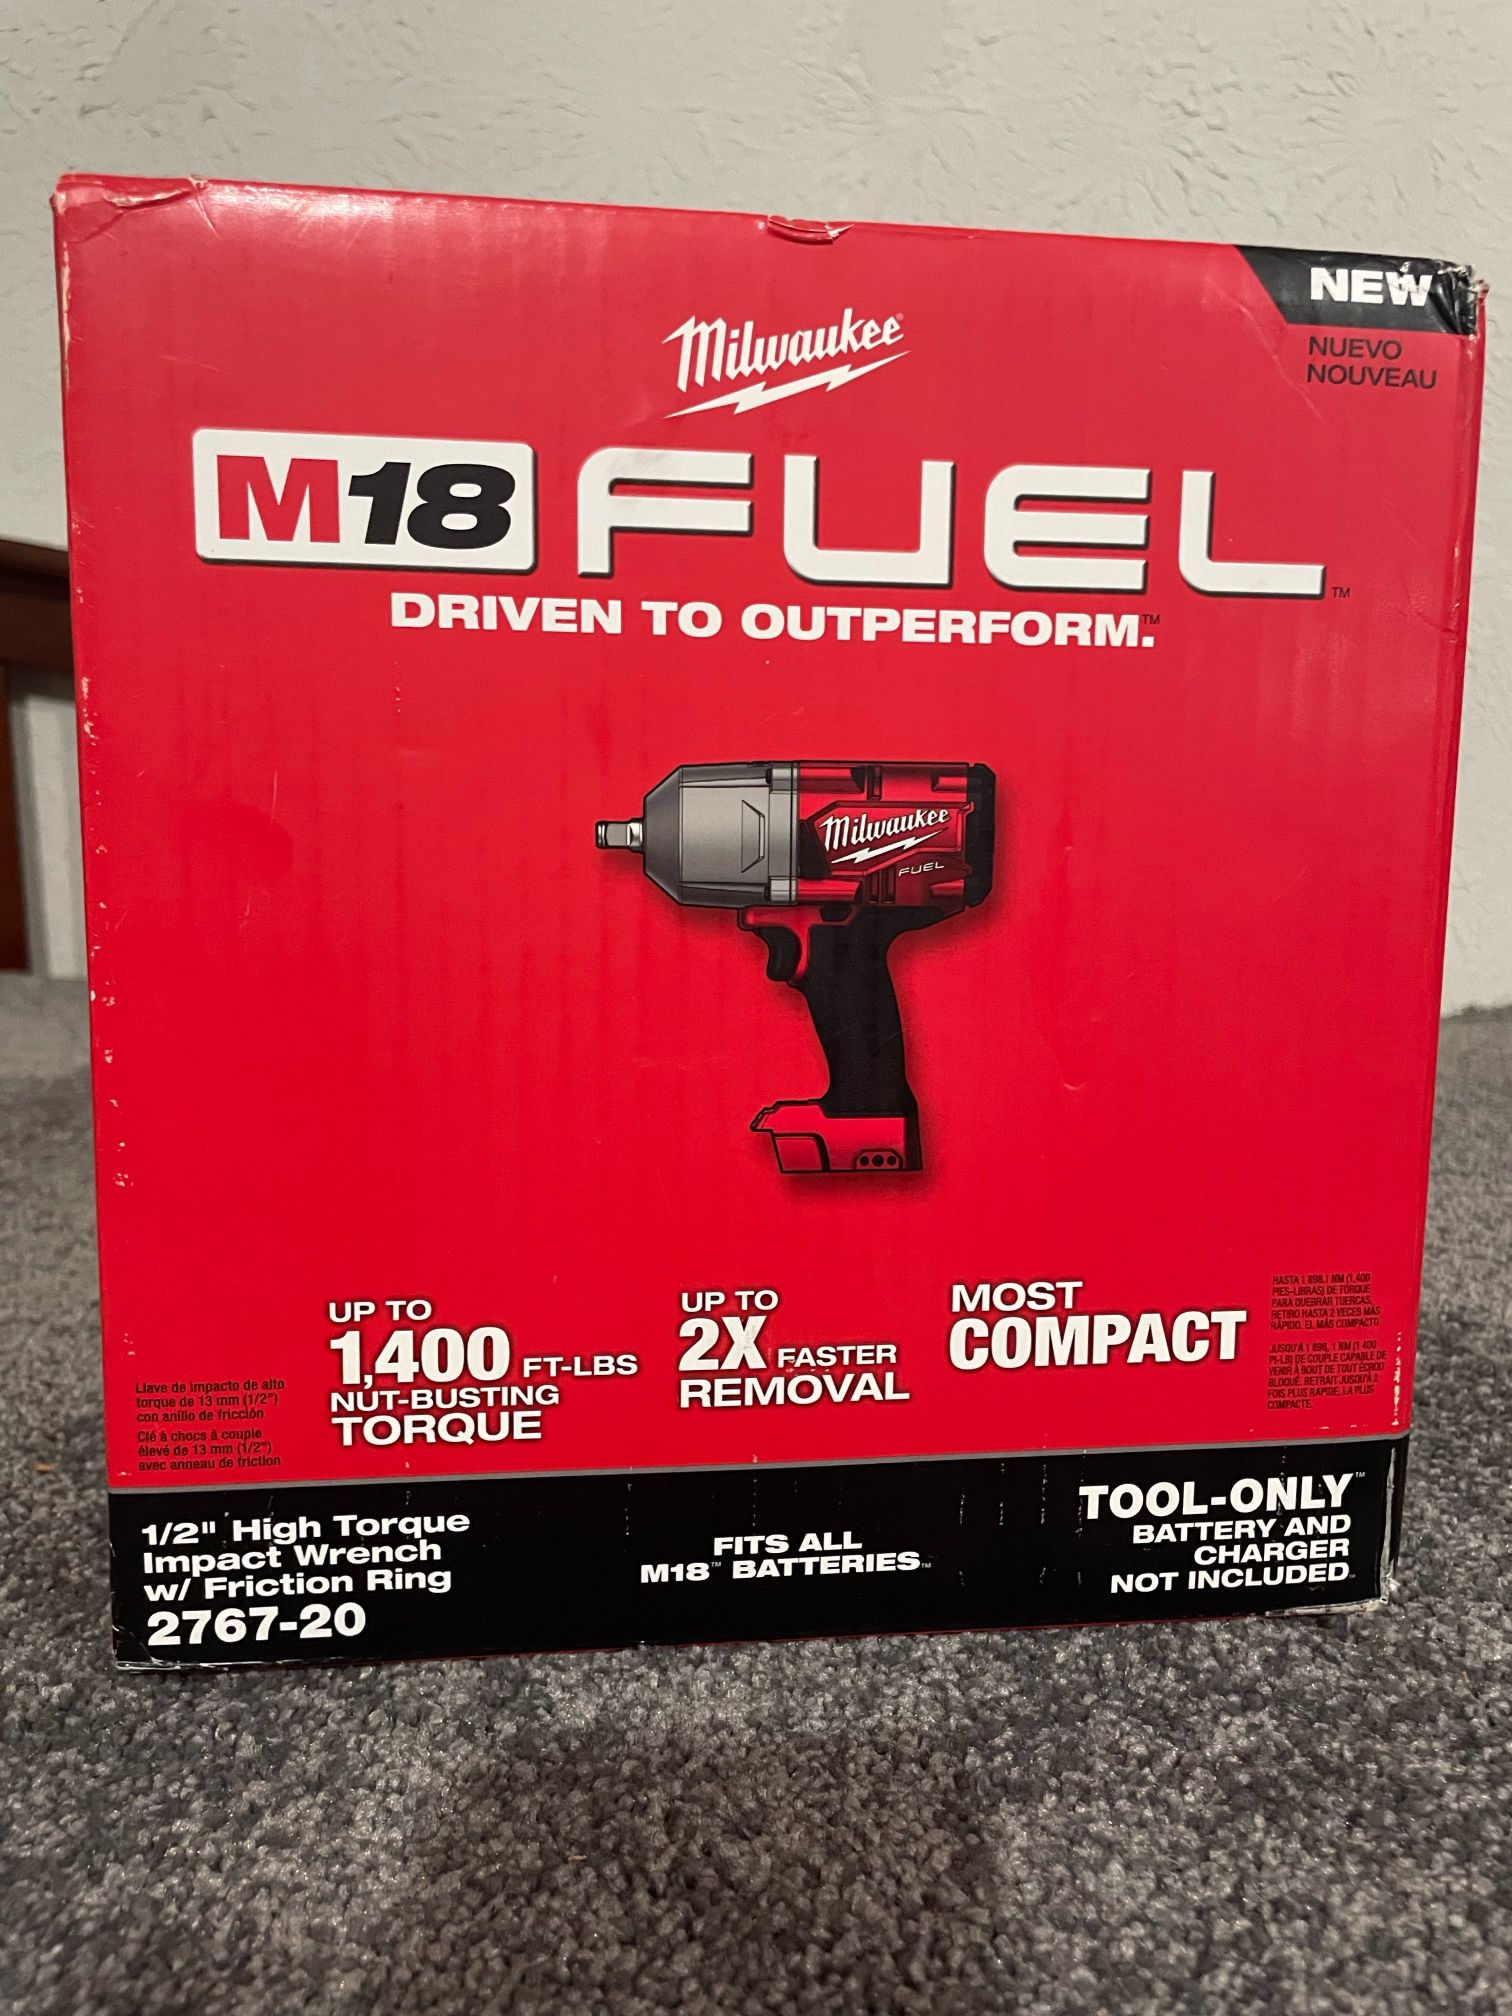 Milwaukee 1/2” High Torque Impact Wrench 2767-20 for Sale in Lindenwald, OH  OfferUp